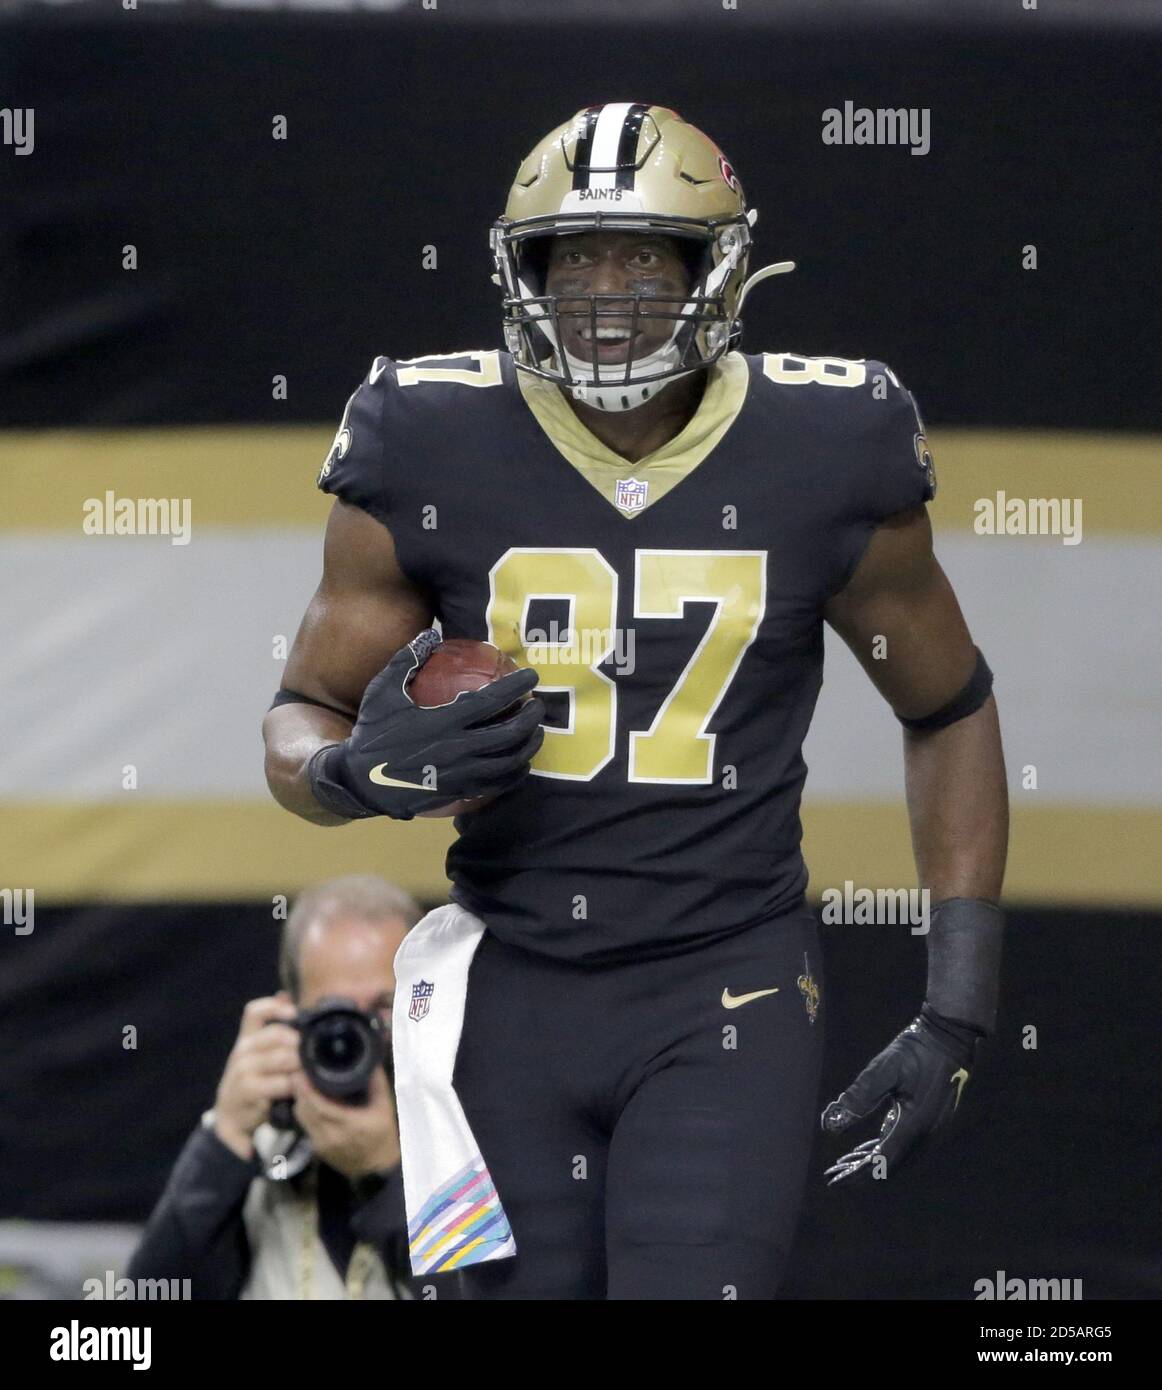 New Orleans, United States. 13th Oct, 2020. New Orleans Saints tight end Jared Cook (87) smiles at teammates after scoring against the Los Angeles Chargers late in the game at the Louisiana Superdome in New Orleans on Monday, October 12, 2020. Photo by AJ Sisco/UPI. Credit: UPI/Alamy Live News Stock Photo